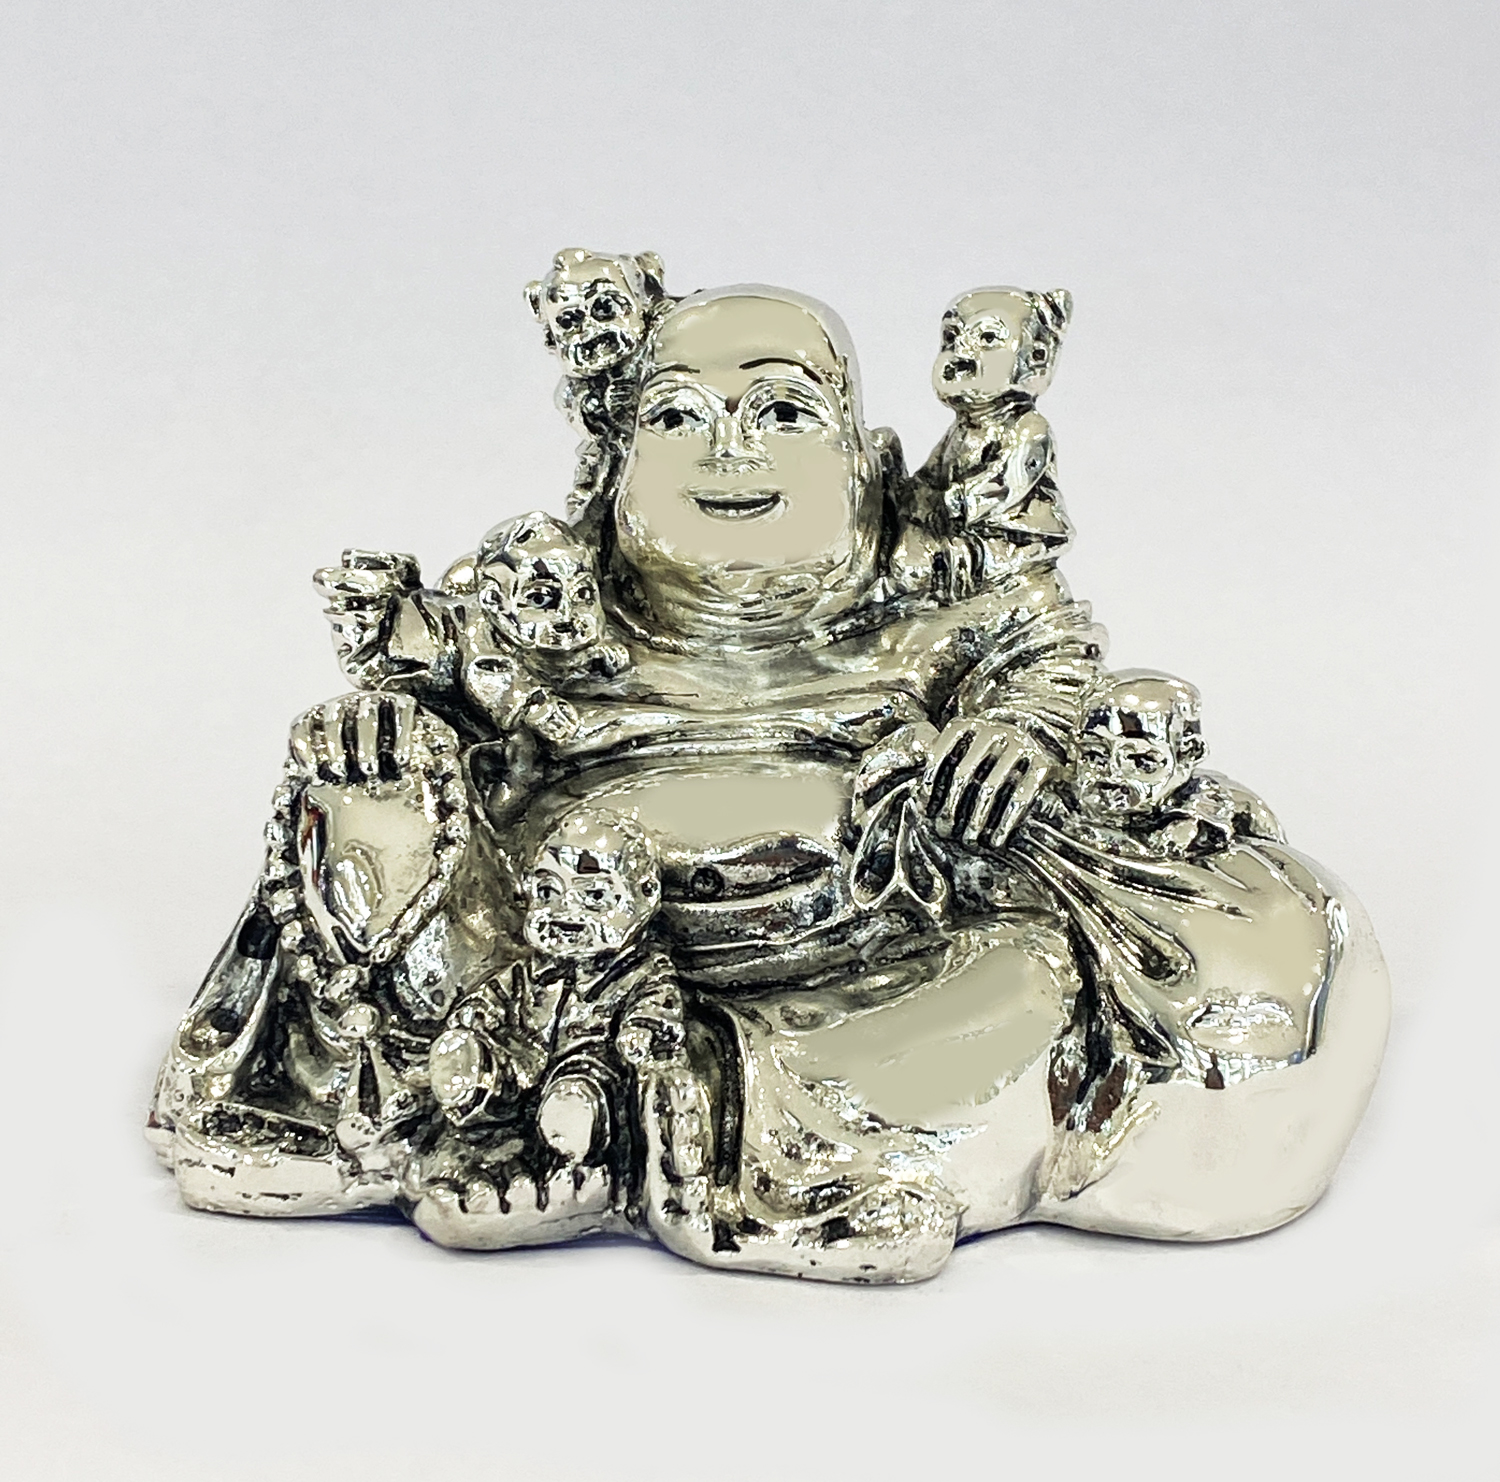 A Silver Laughing Buddha Statue | 4 Inch